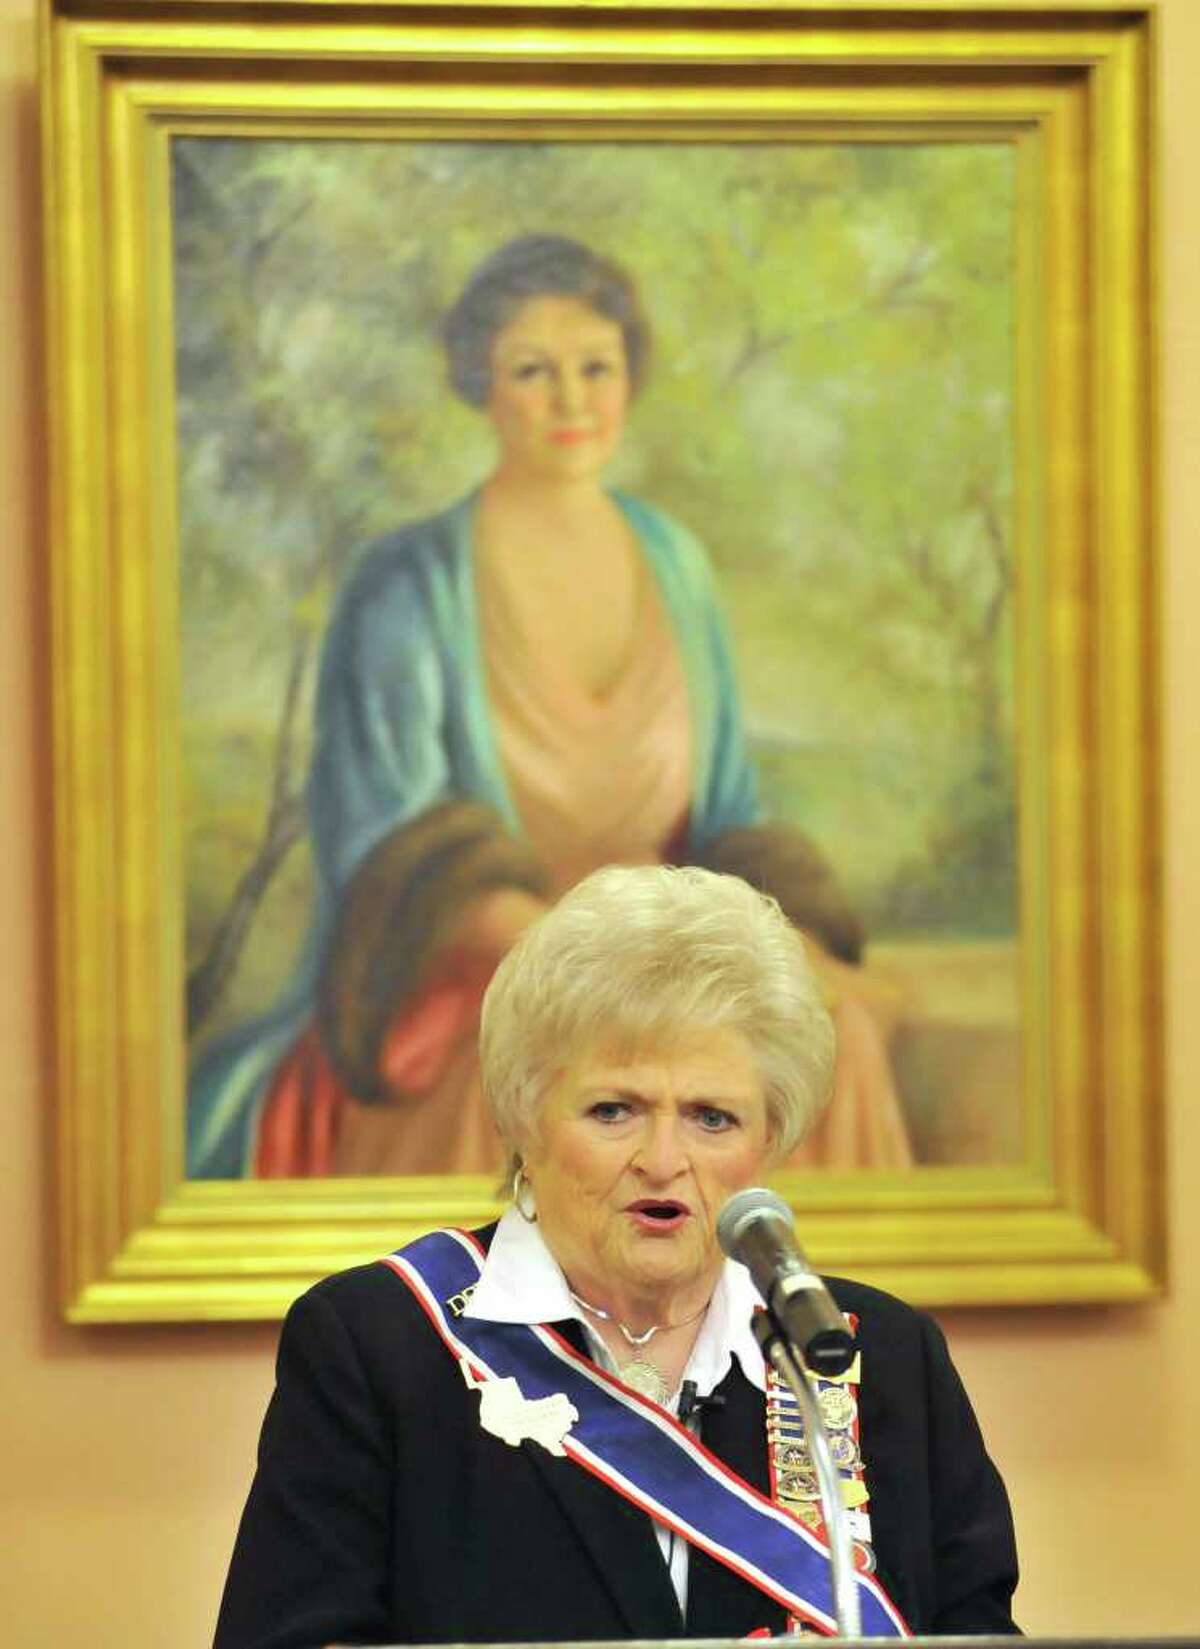 DRT President General Karen Thompson speaks in front of a well-known portrait of Clara Driscoll in this photo from December 2011.